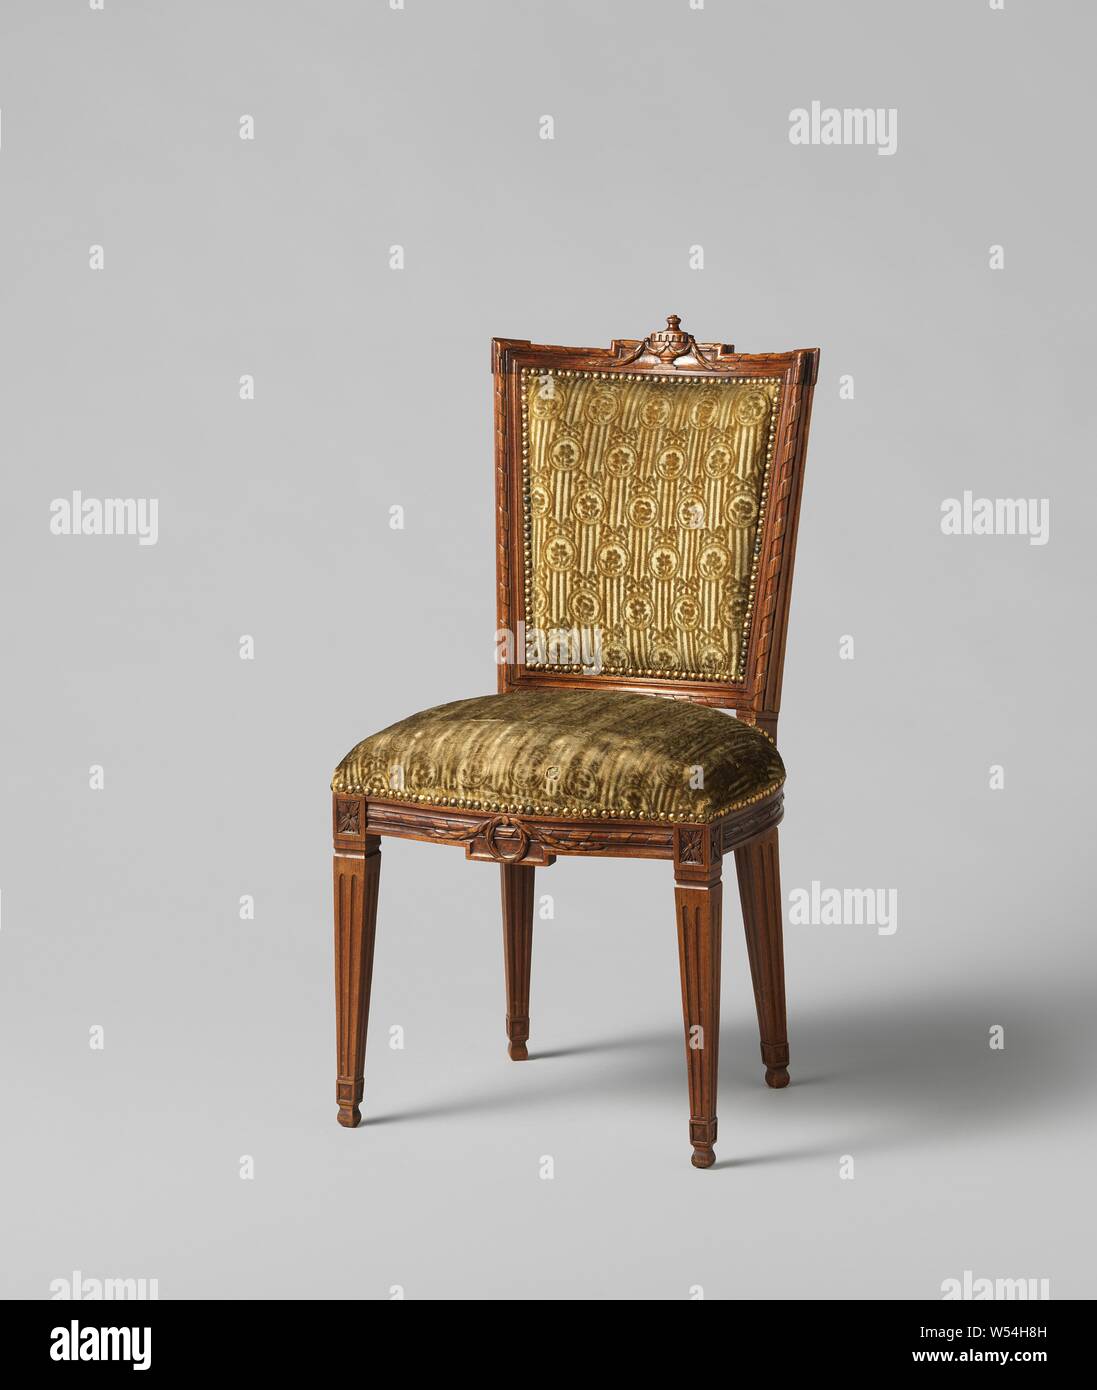 Mahogany wood chair covered with a continuous pattern of oval hanging  flowers with a flower on a striped ground, Mahogany wood chair covered with  a continuous pattern of oval hanging flowers with